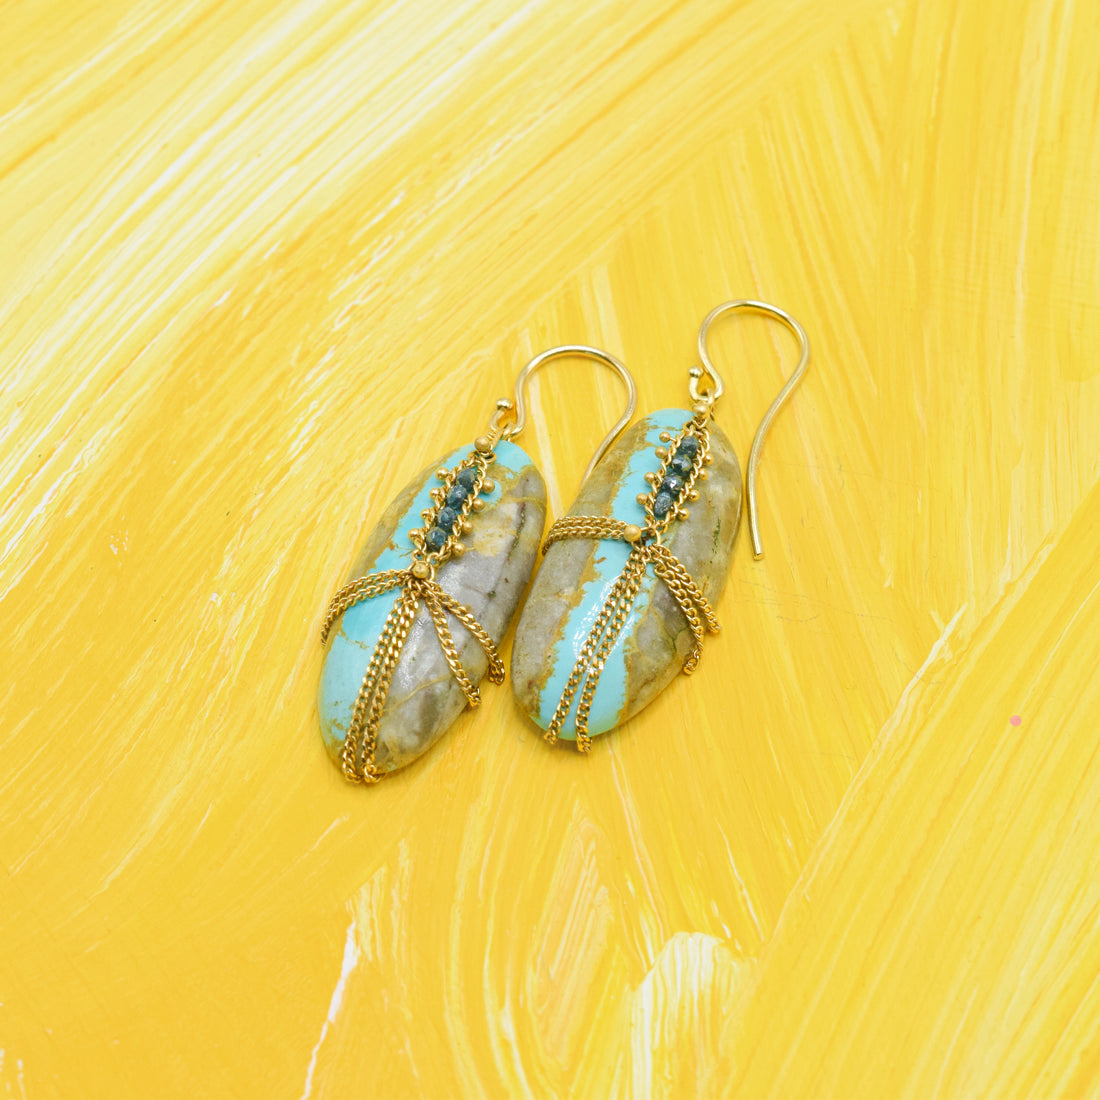 Amali Turquoise Earrings Draped with Gold Chain & Blue Diamonds